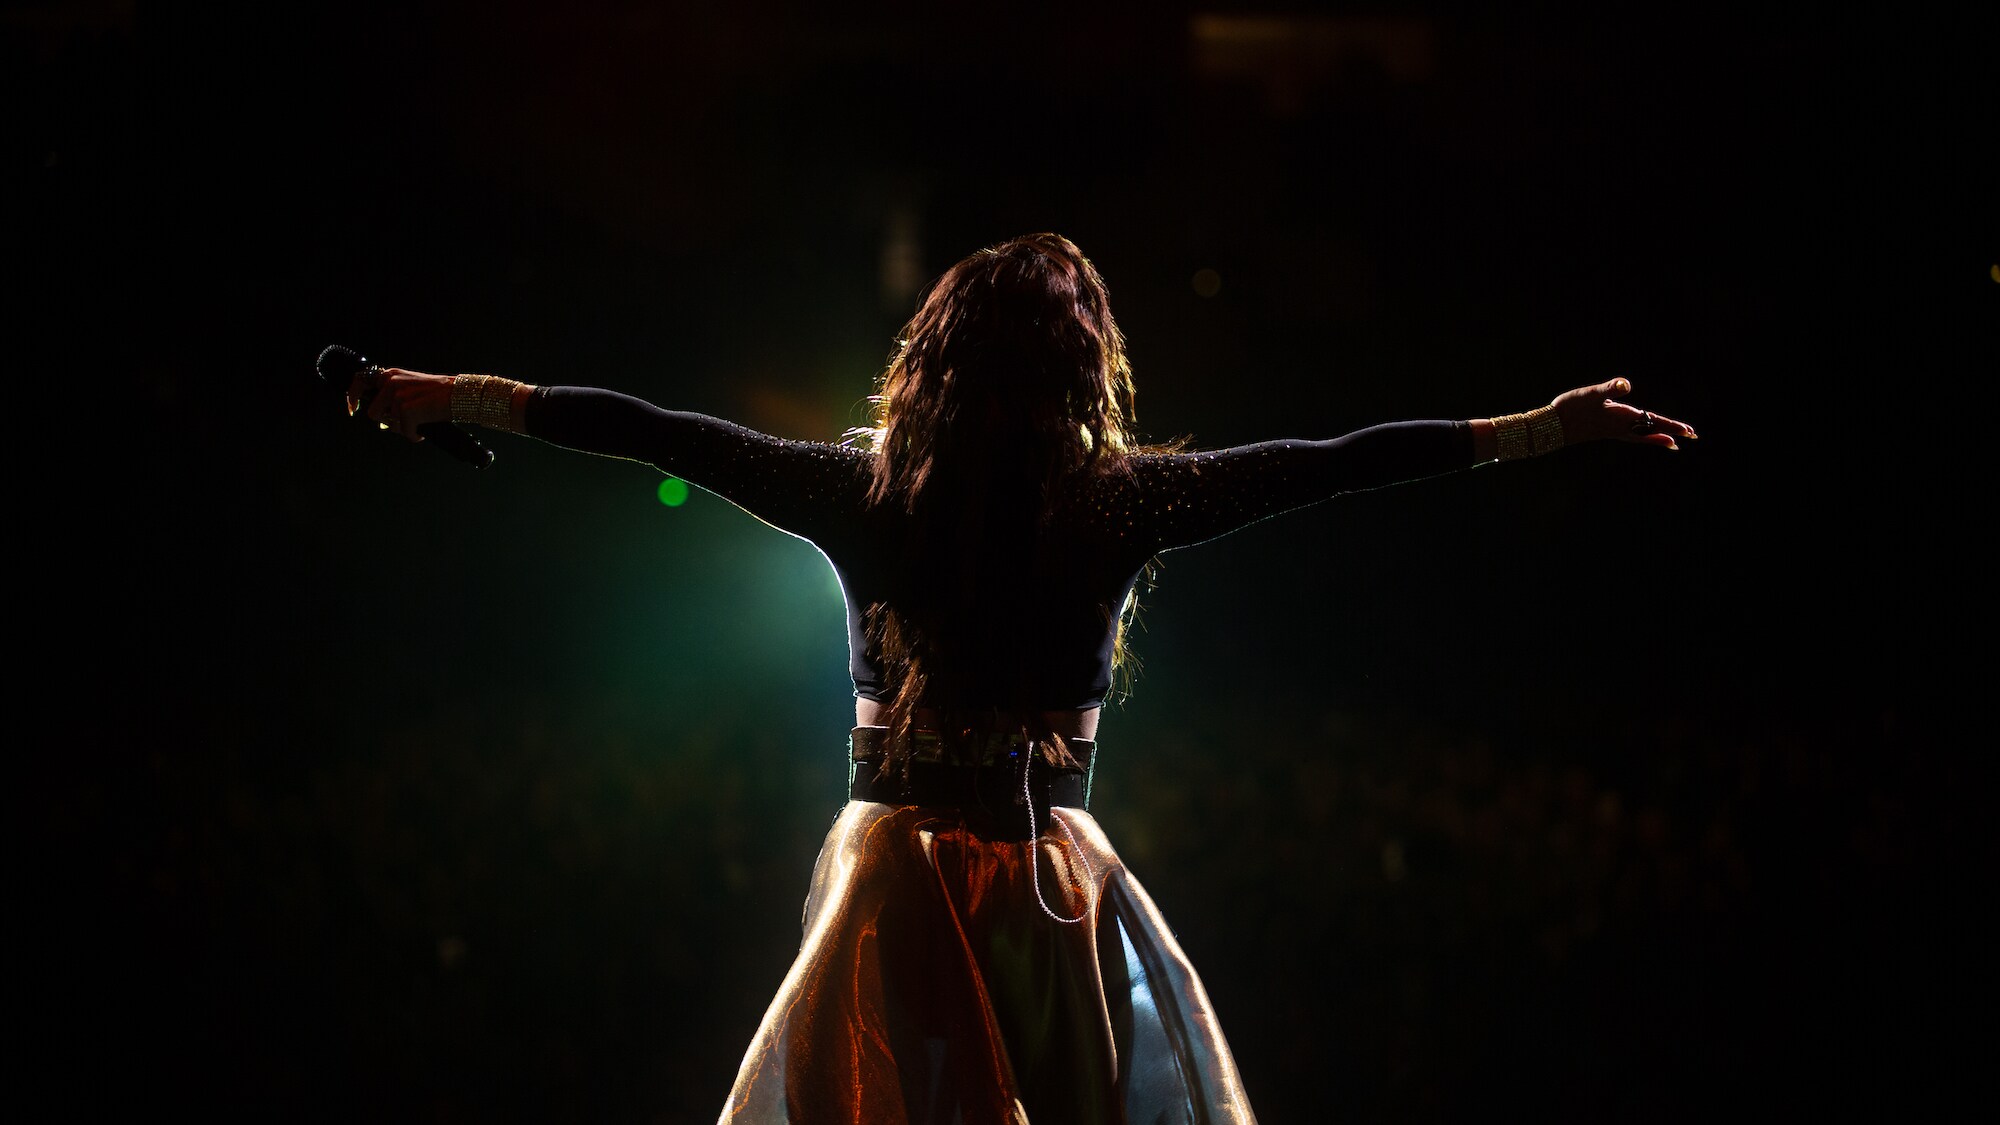 Tony Award®-winning actress and singer Idina Menzel takes audiences on an intimate journey into her life on and off the stage in the new Disney+ documentary "Idina Menzel: Which Way to the Stage?" from Disney Branded Television. (Photo by Eric Maldin/Walkman Productions Inc.)